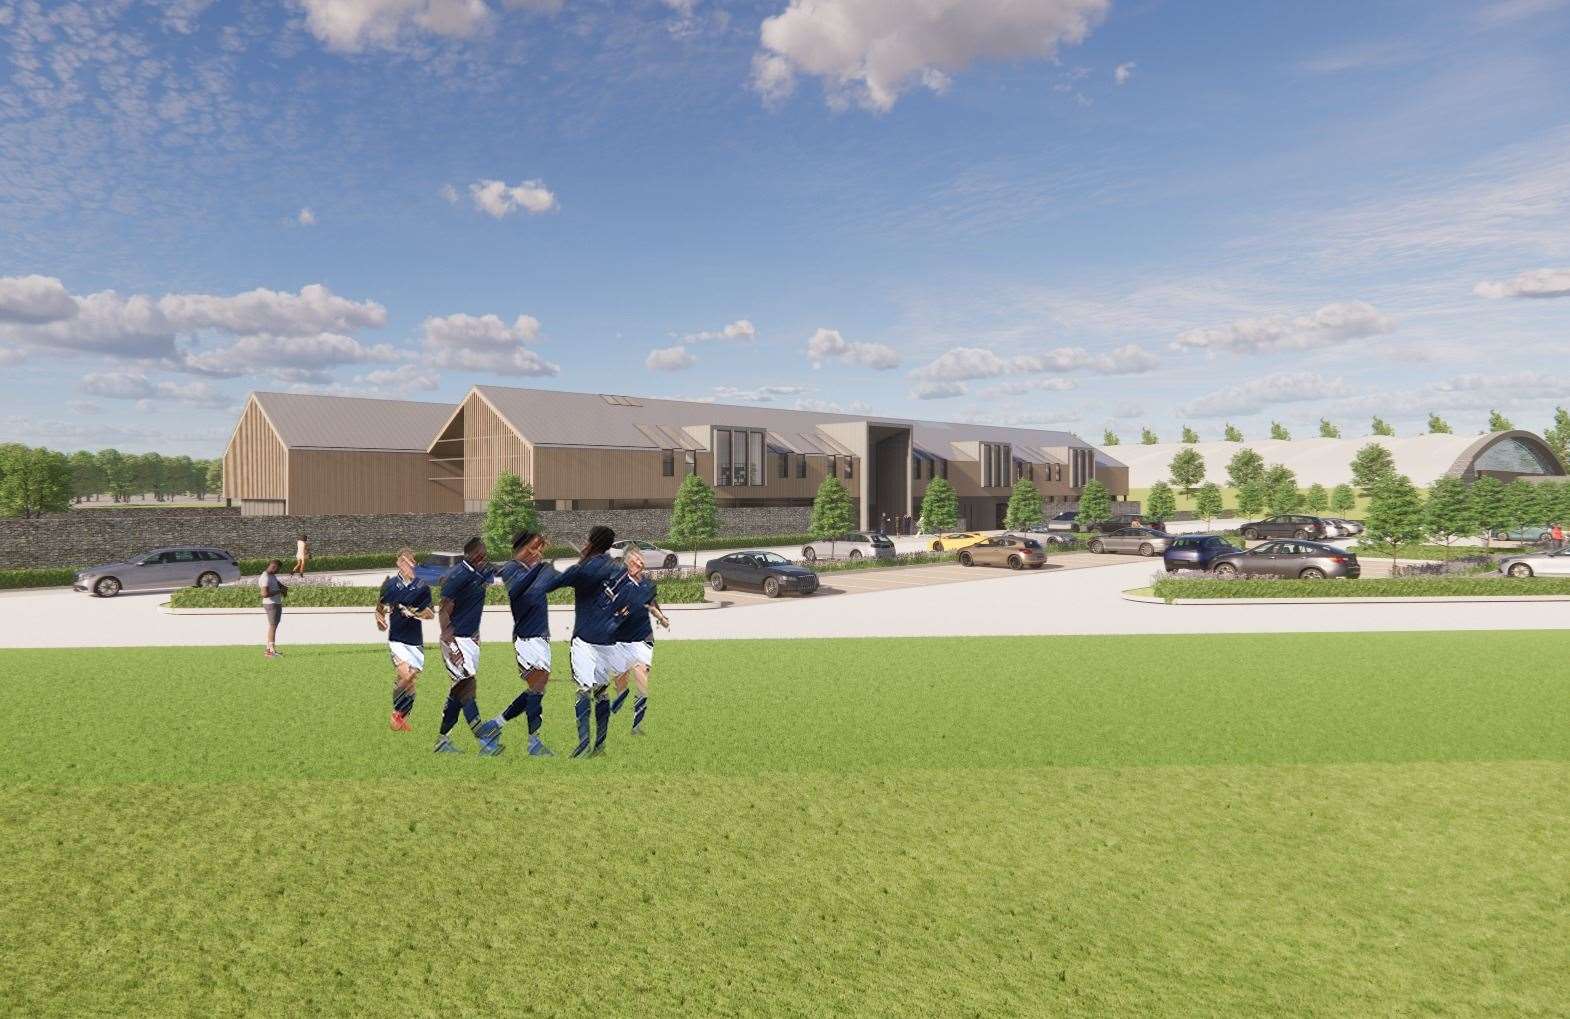 Planning permission granted for new Millwall FC training ground